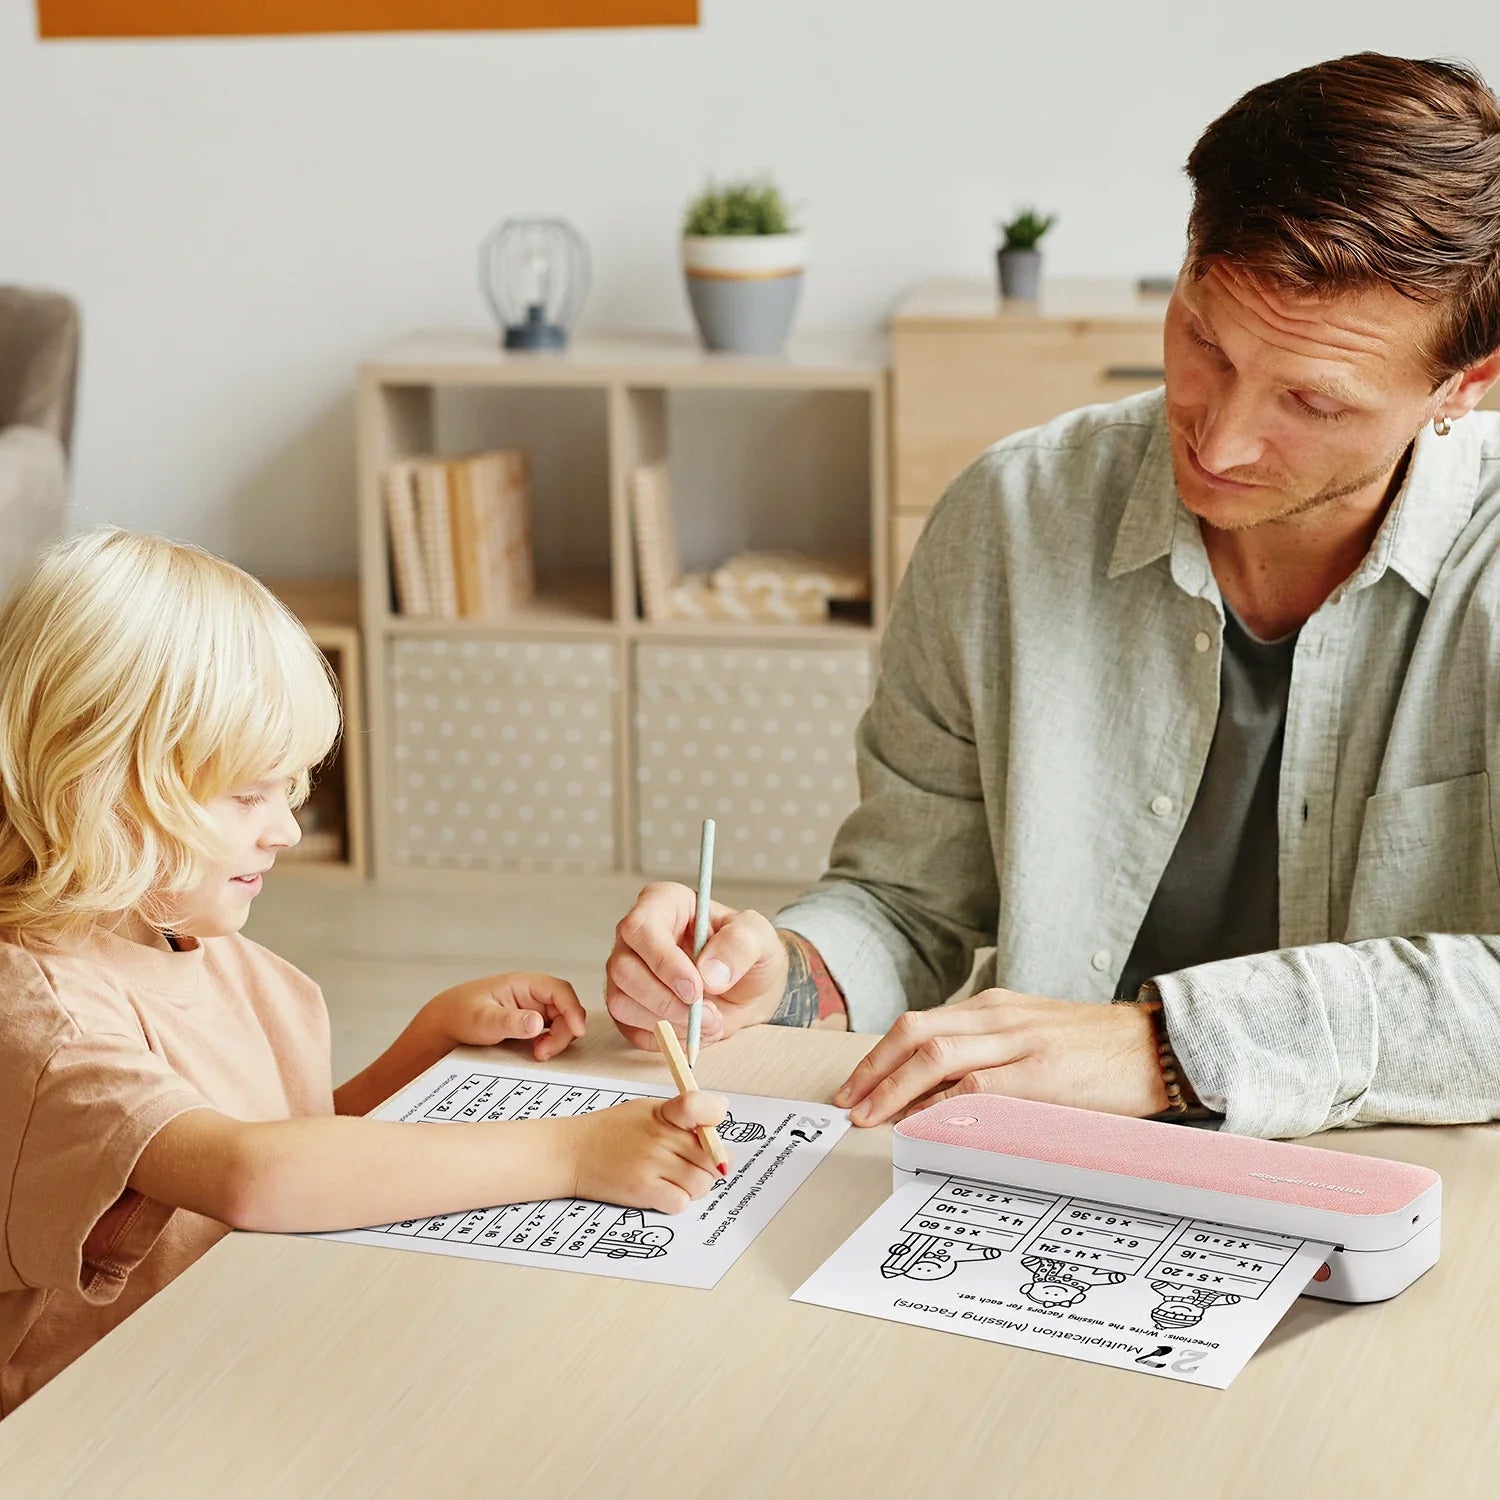 Parents can use the MUNBYN A4 printer to print test questions for their children.